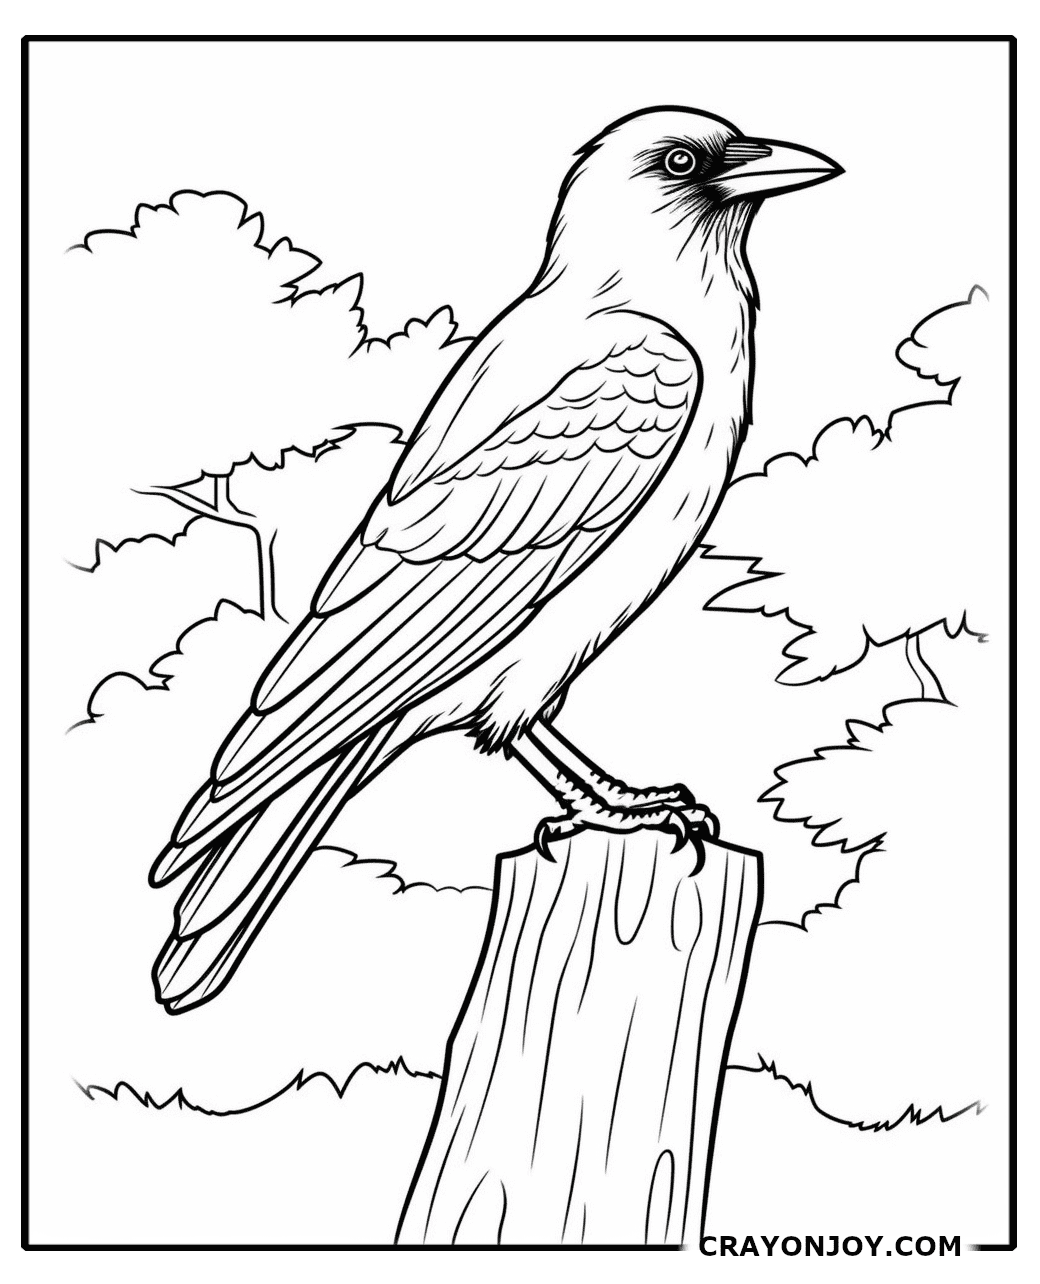 Crow Coloring Pages: Free Printable Designs for Kids and Adults